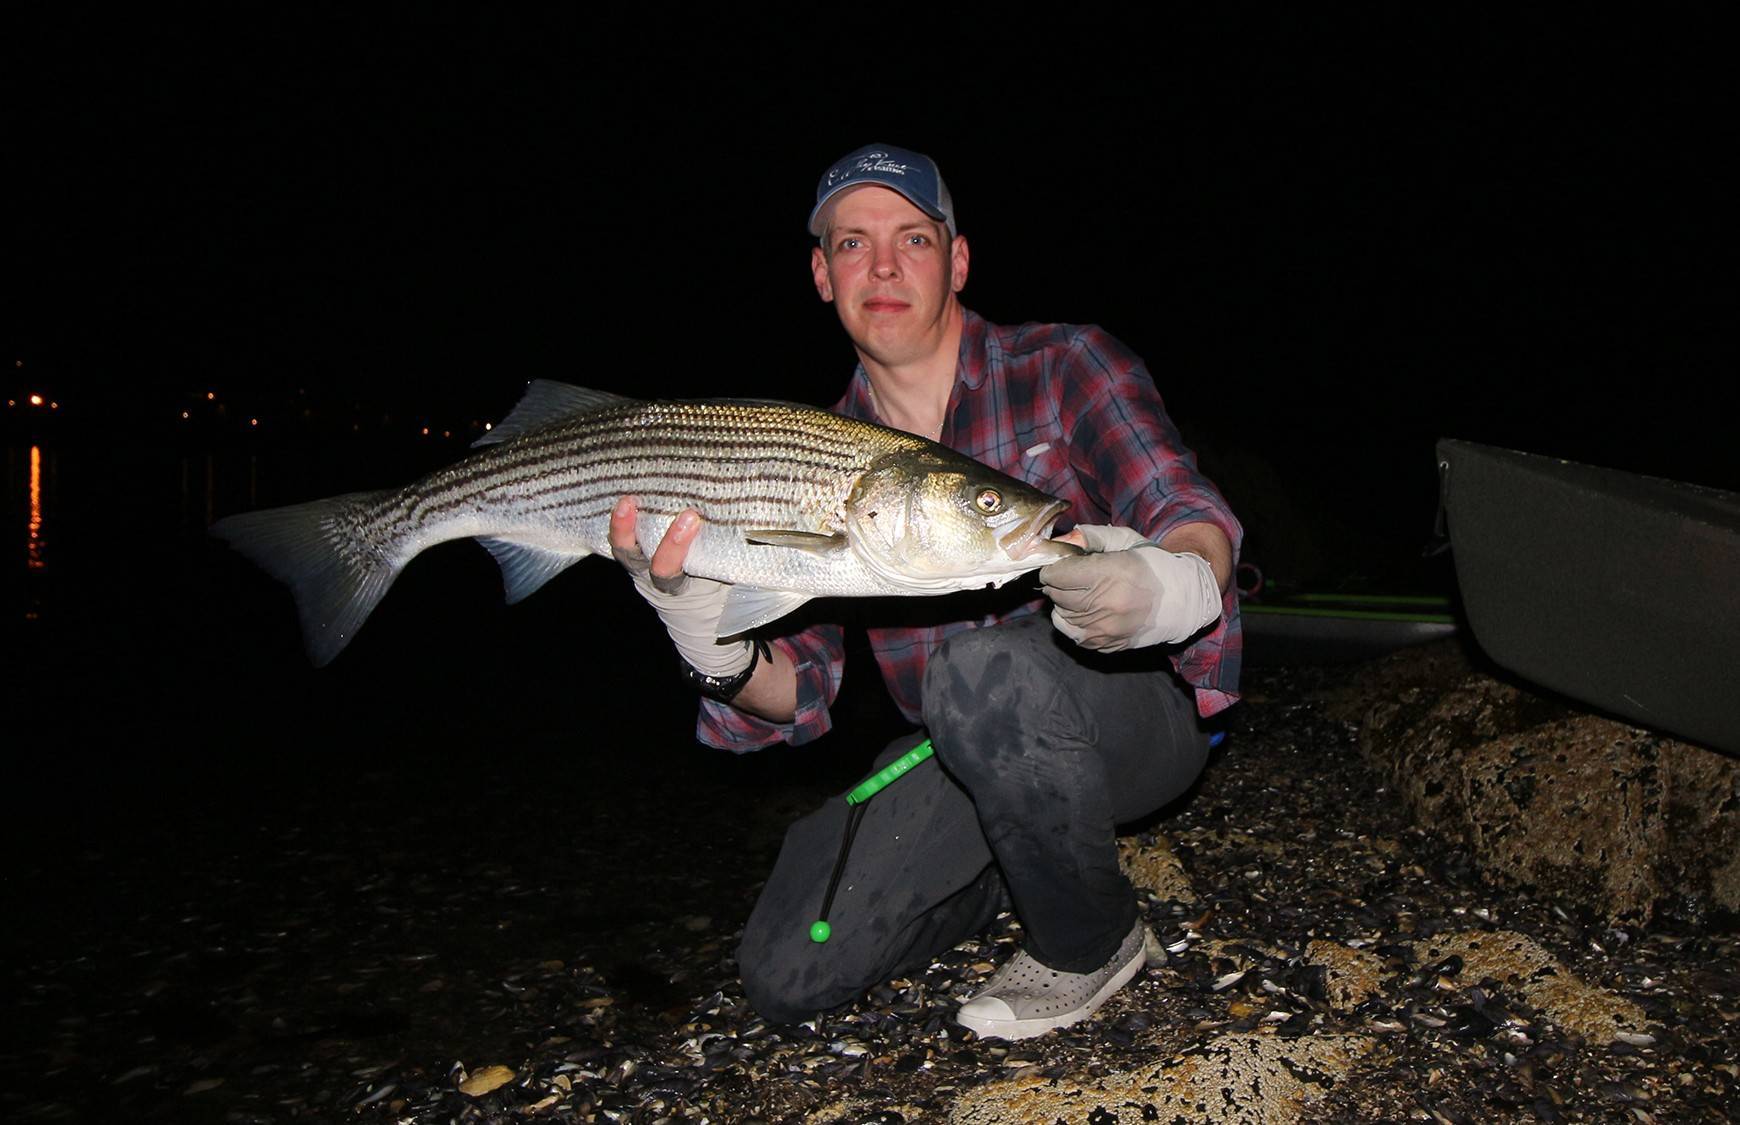 Griffin Dunn with a hefty striper from last July – hoping for another good month.